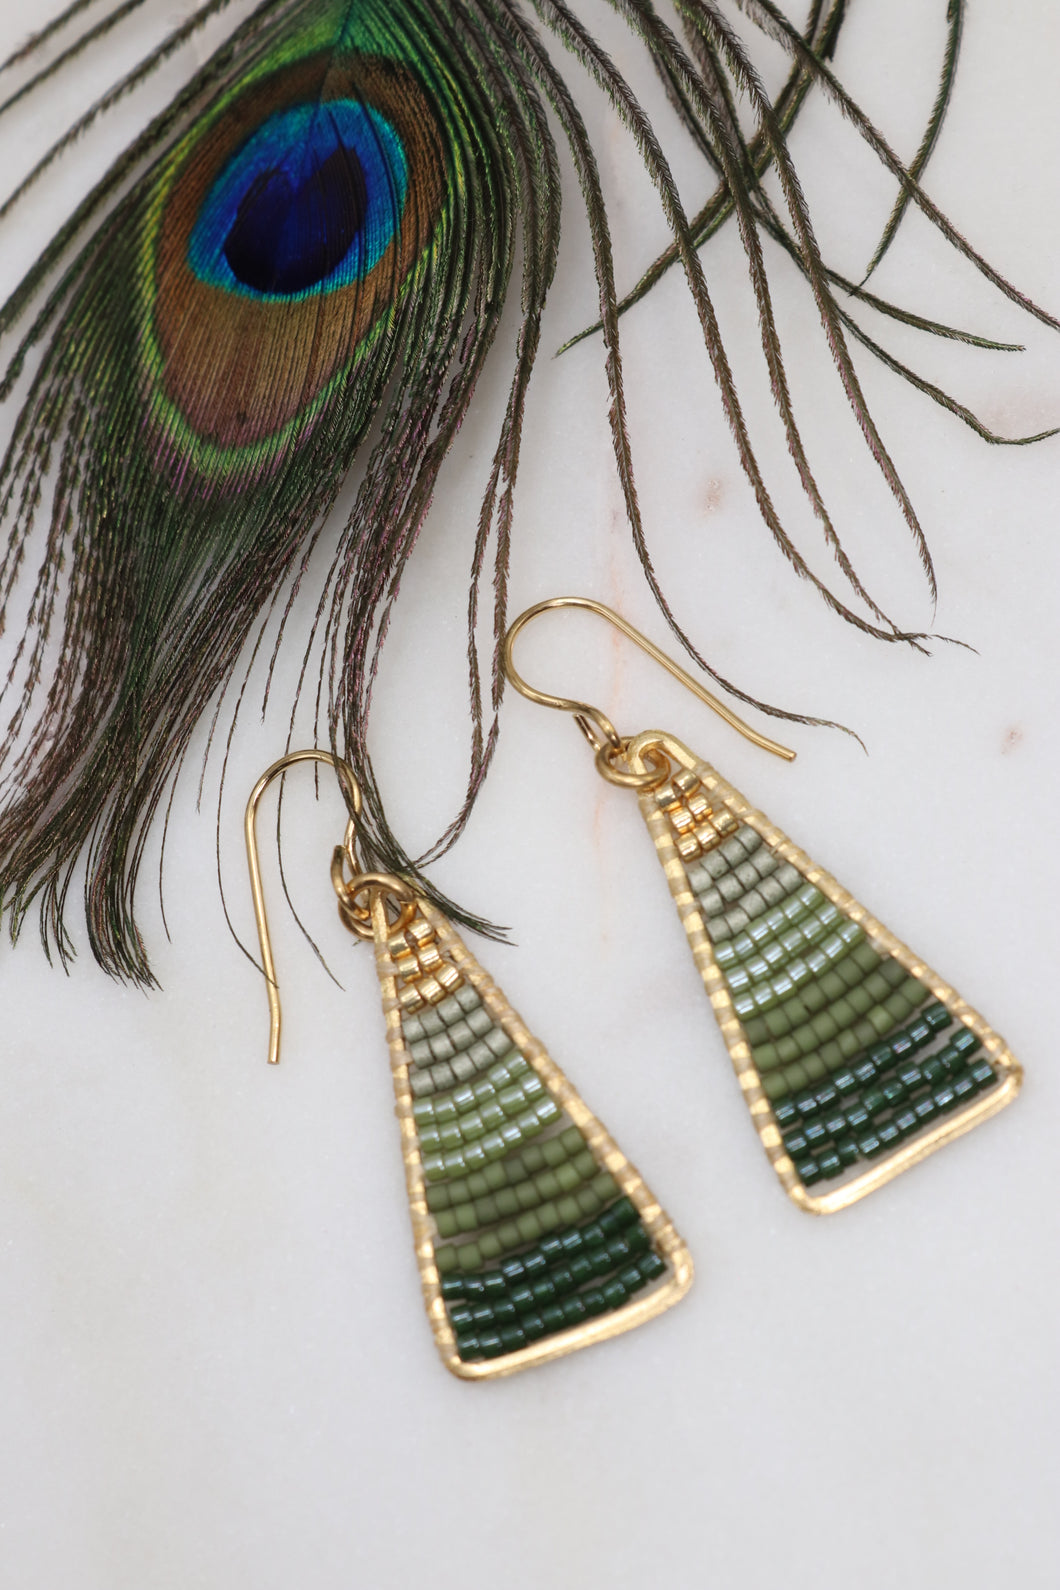 Lightweight hand beaded boho earrings made from golden brass triangles with premium delica seed beads strung horizontally inside in an ombre pattern from gold at the top through olive and avocado greens 